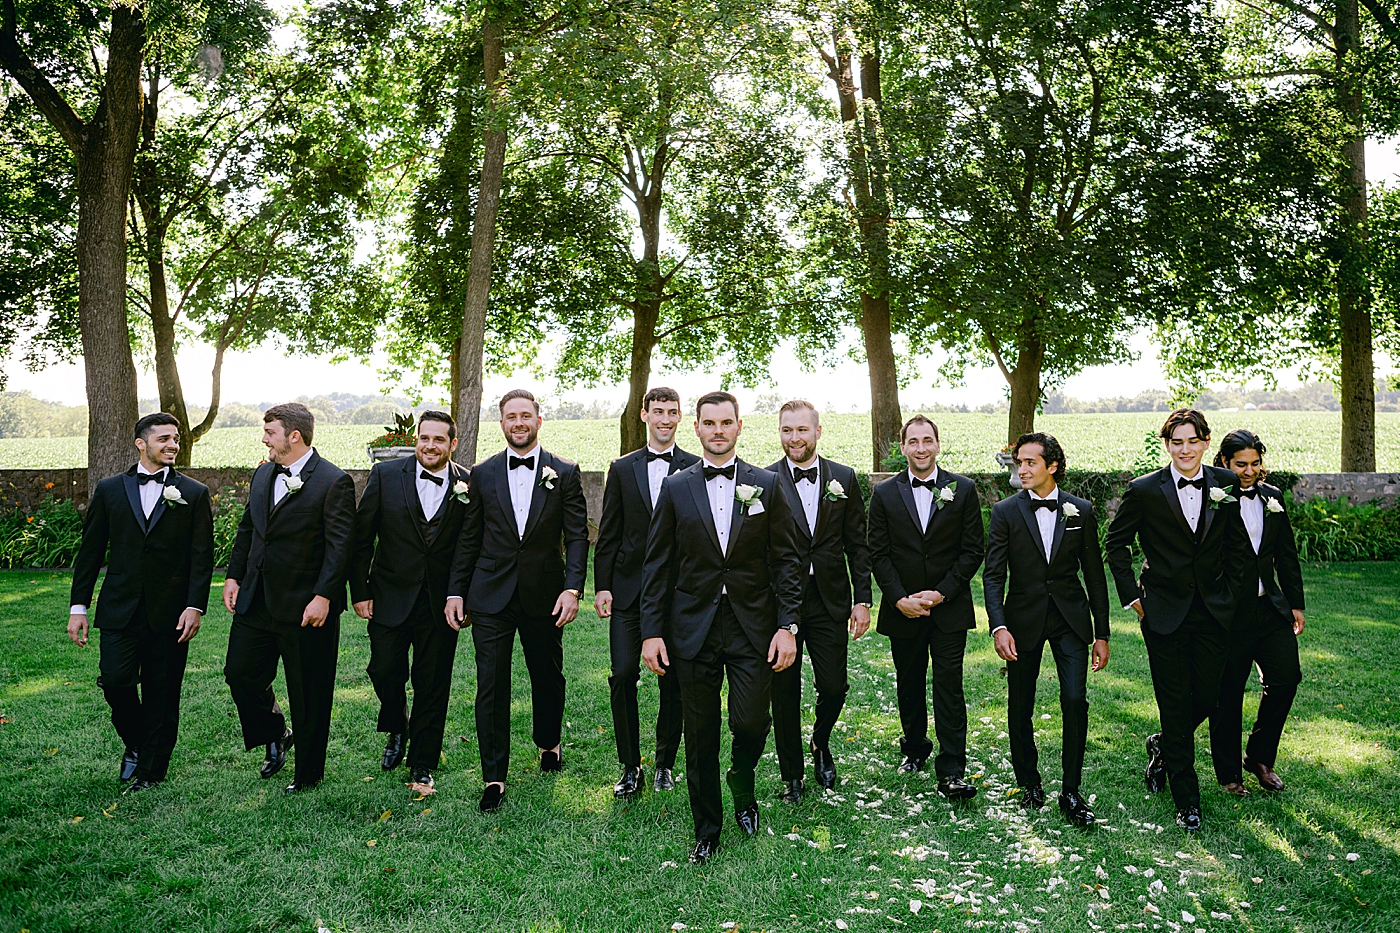 Groomsmen walking through a garden | Image by Hope Helmuth Photography